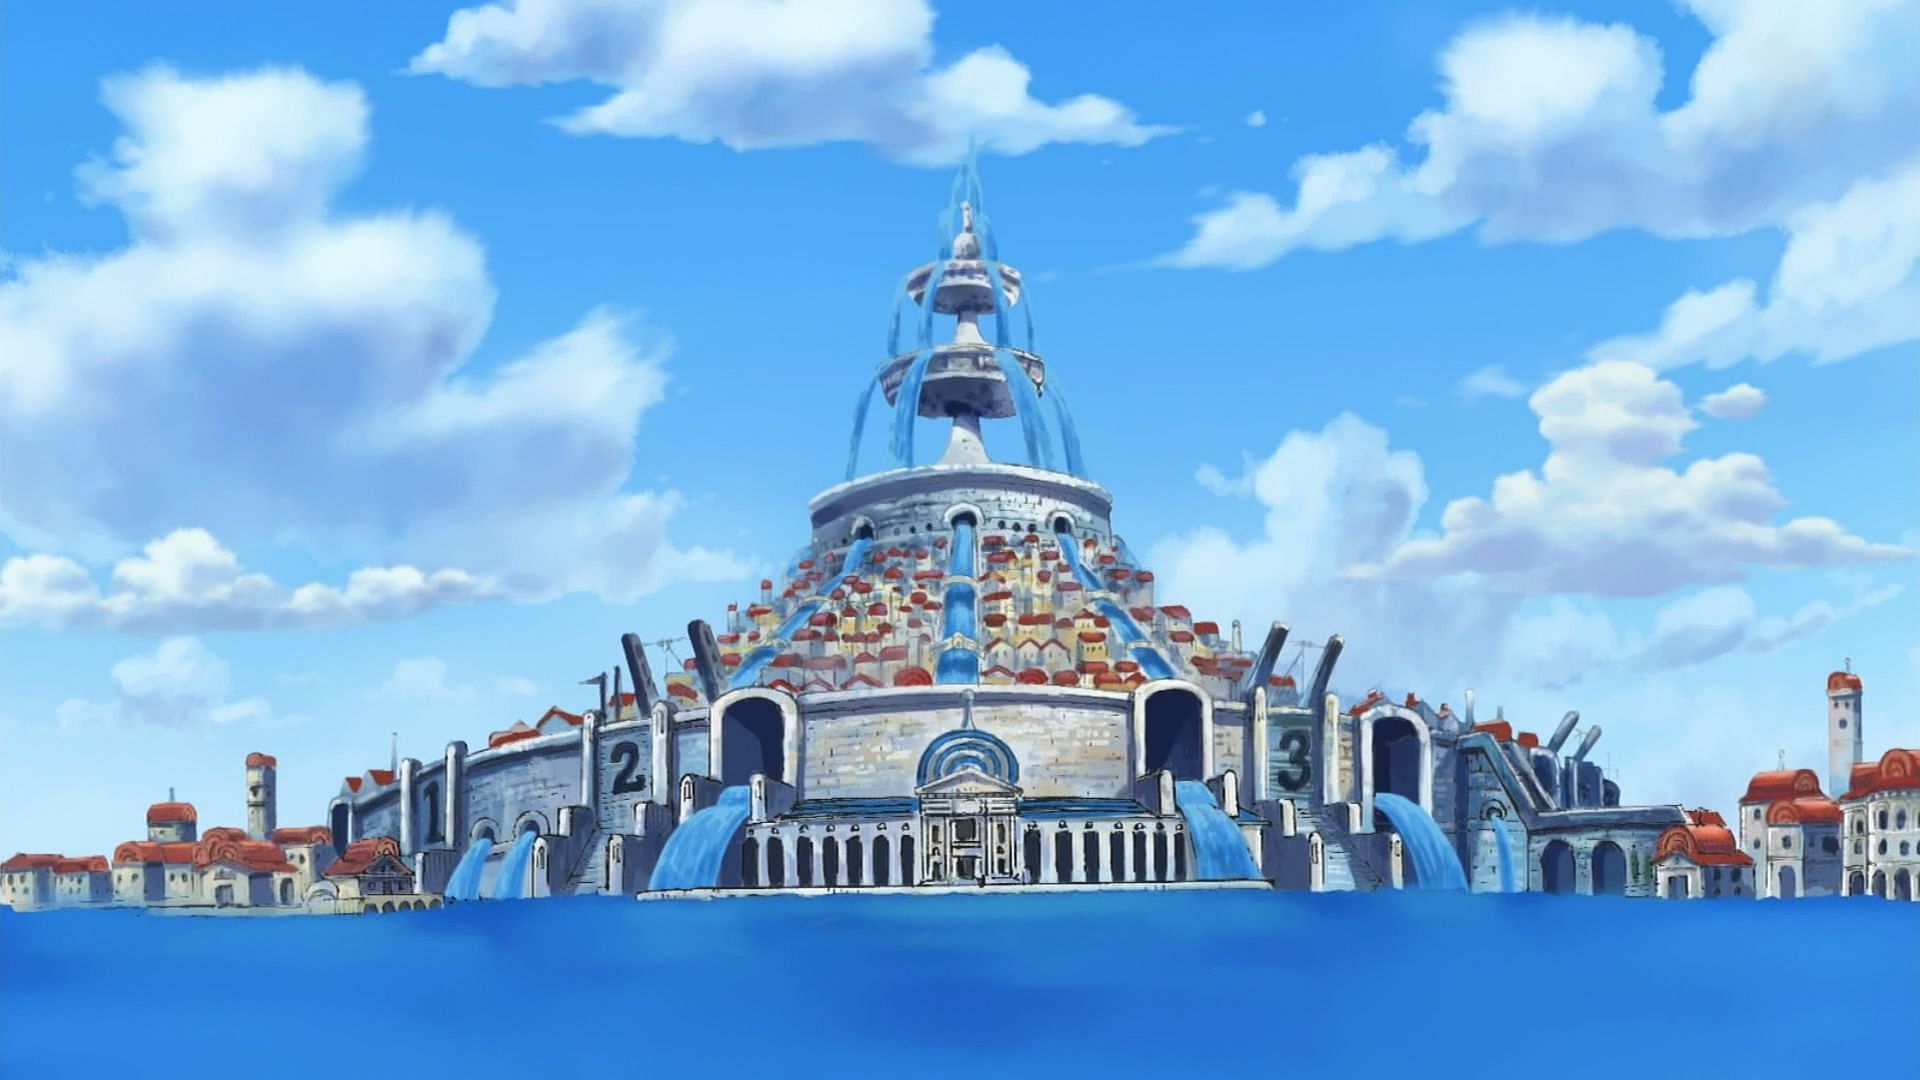 Paulie&#039;s concern for Water 7 is understandable given the city&#039;s aquatic nature (Image via Toei Animation)